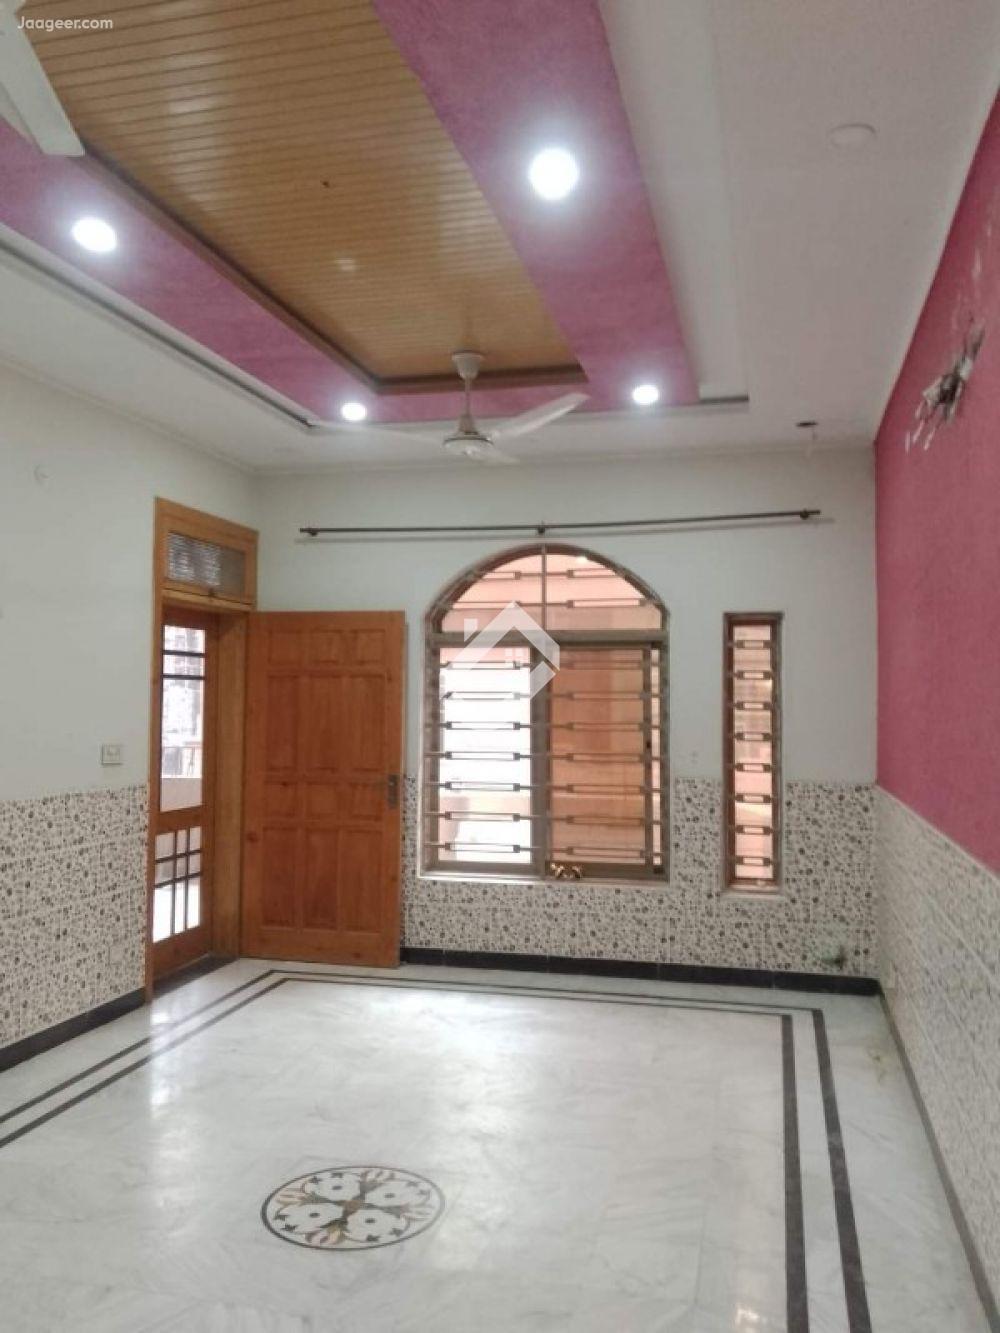 View  7 Marla Upper Portion House For Rent In Ghauri Town Phase 5A in Ghauri Town, Islamabad